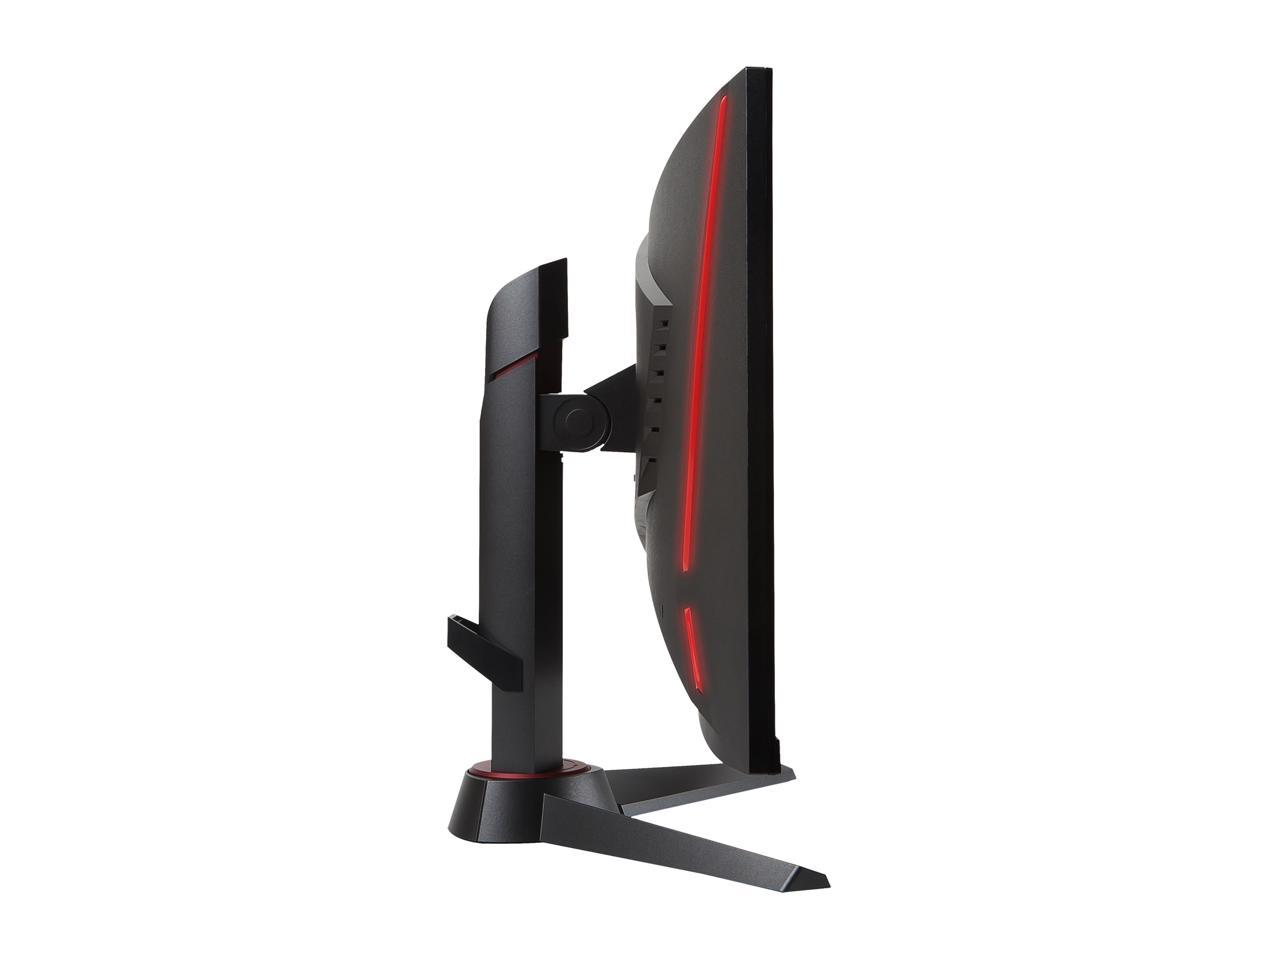 MSI Optix MAG24C 24" Non-Glare 1ms Widescreen Full HD 1920 x 1080 144Hz Refresh Rate Curved Gaming Monitor with AMD FreeSync Technology